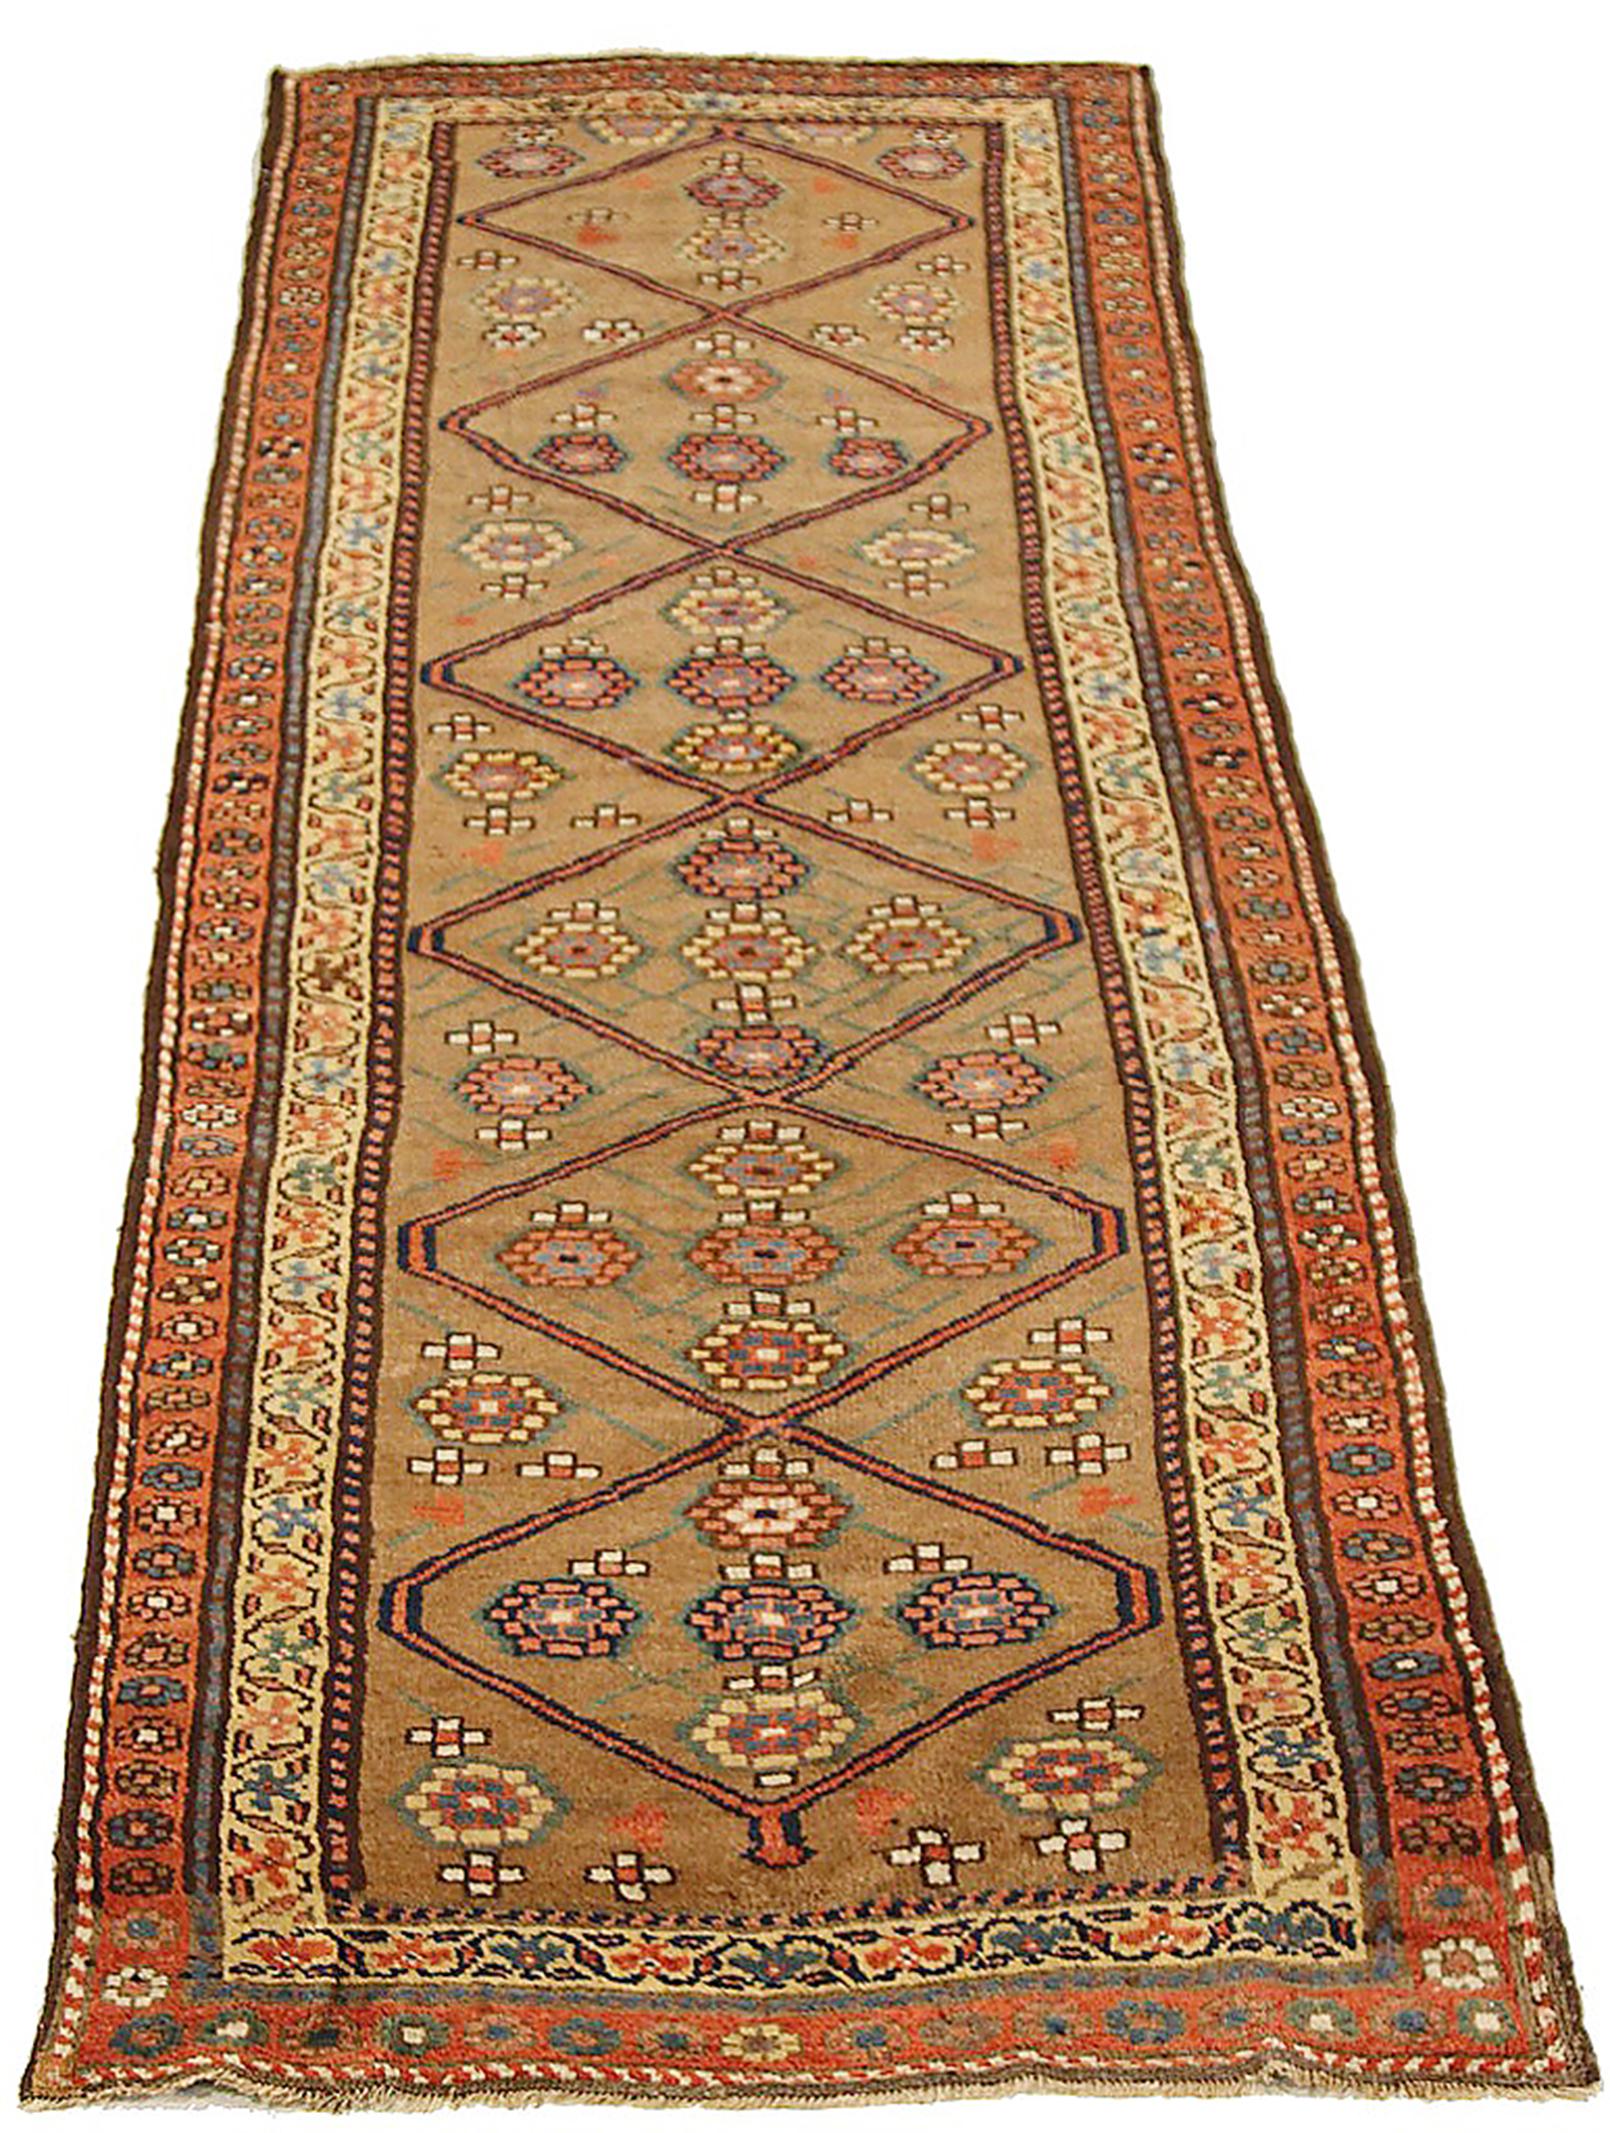 Islamic Antique Persian Bijar Runner Rug with Orange & Yellow Floral Medallions For Sale